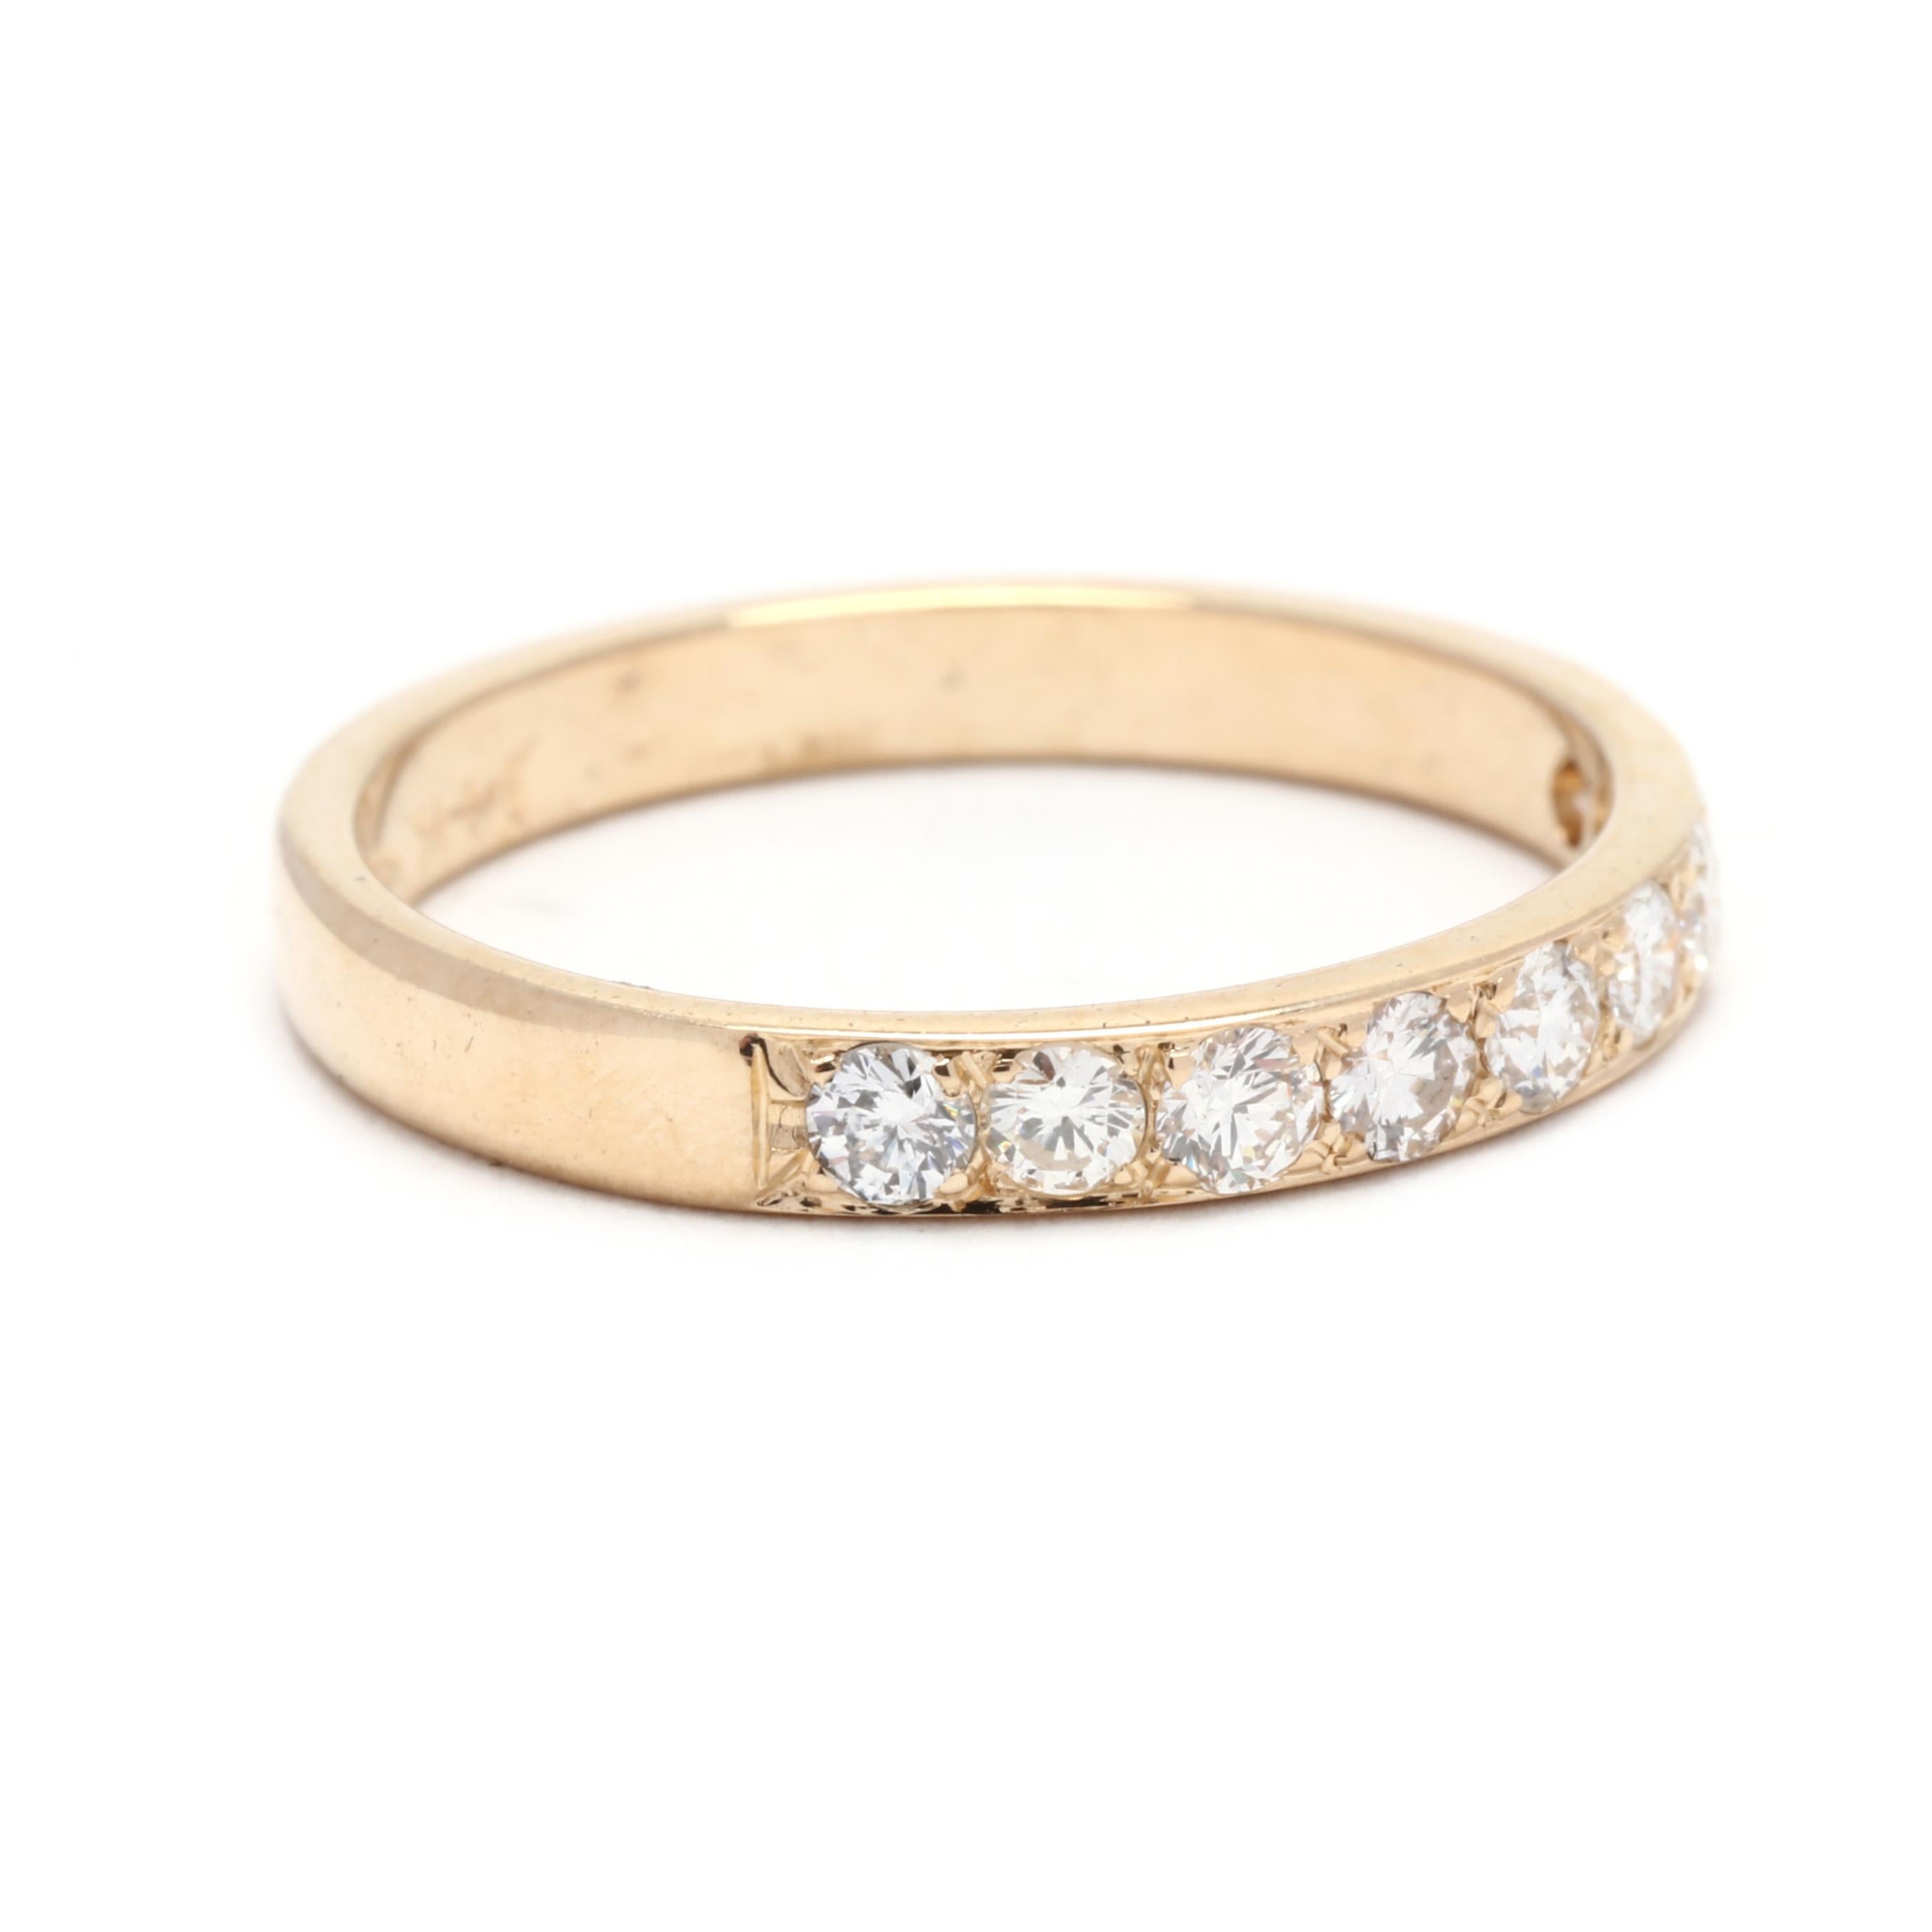 A vintage 14 karat yellow gold thin diamond wedding band. The stackable band features a straight design with bead set, round brilliant cut diamonds weighing approximately .36 total carats.

Stones:
- diamonds, 9 stones
- round brilliant cut
- 2.3